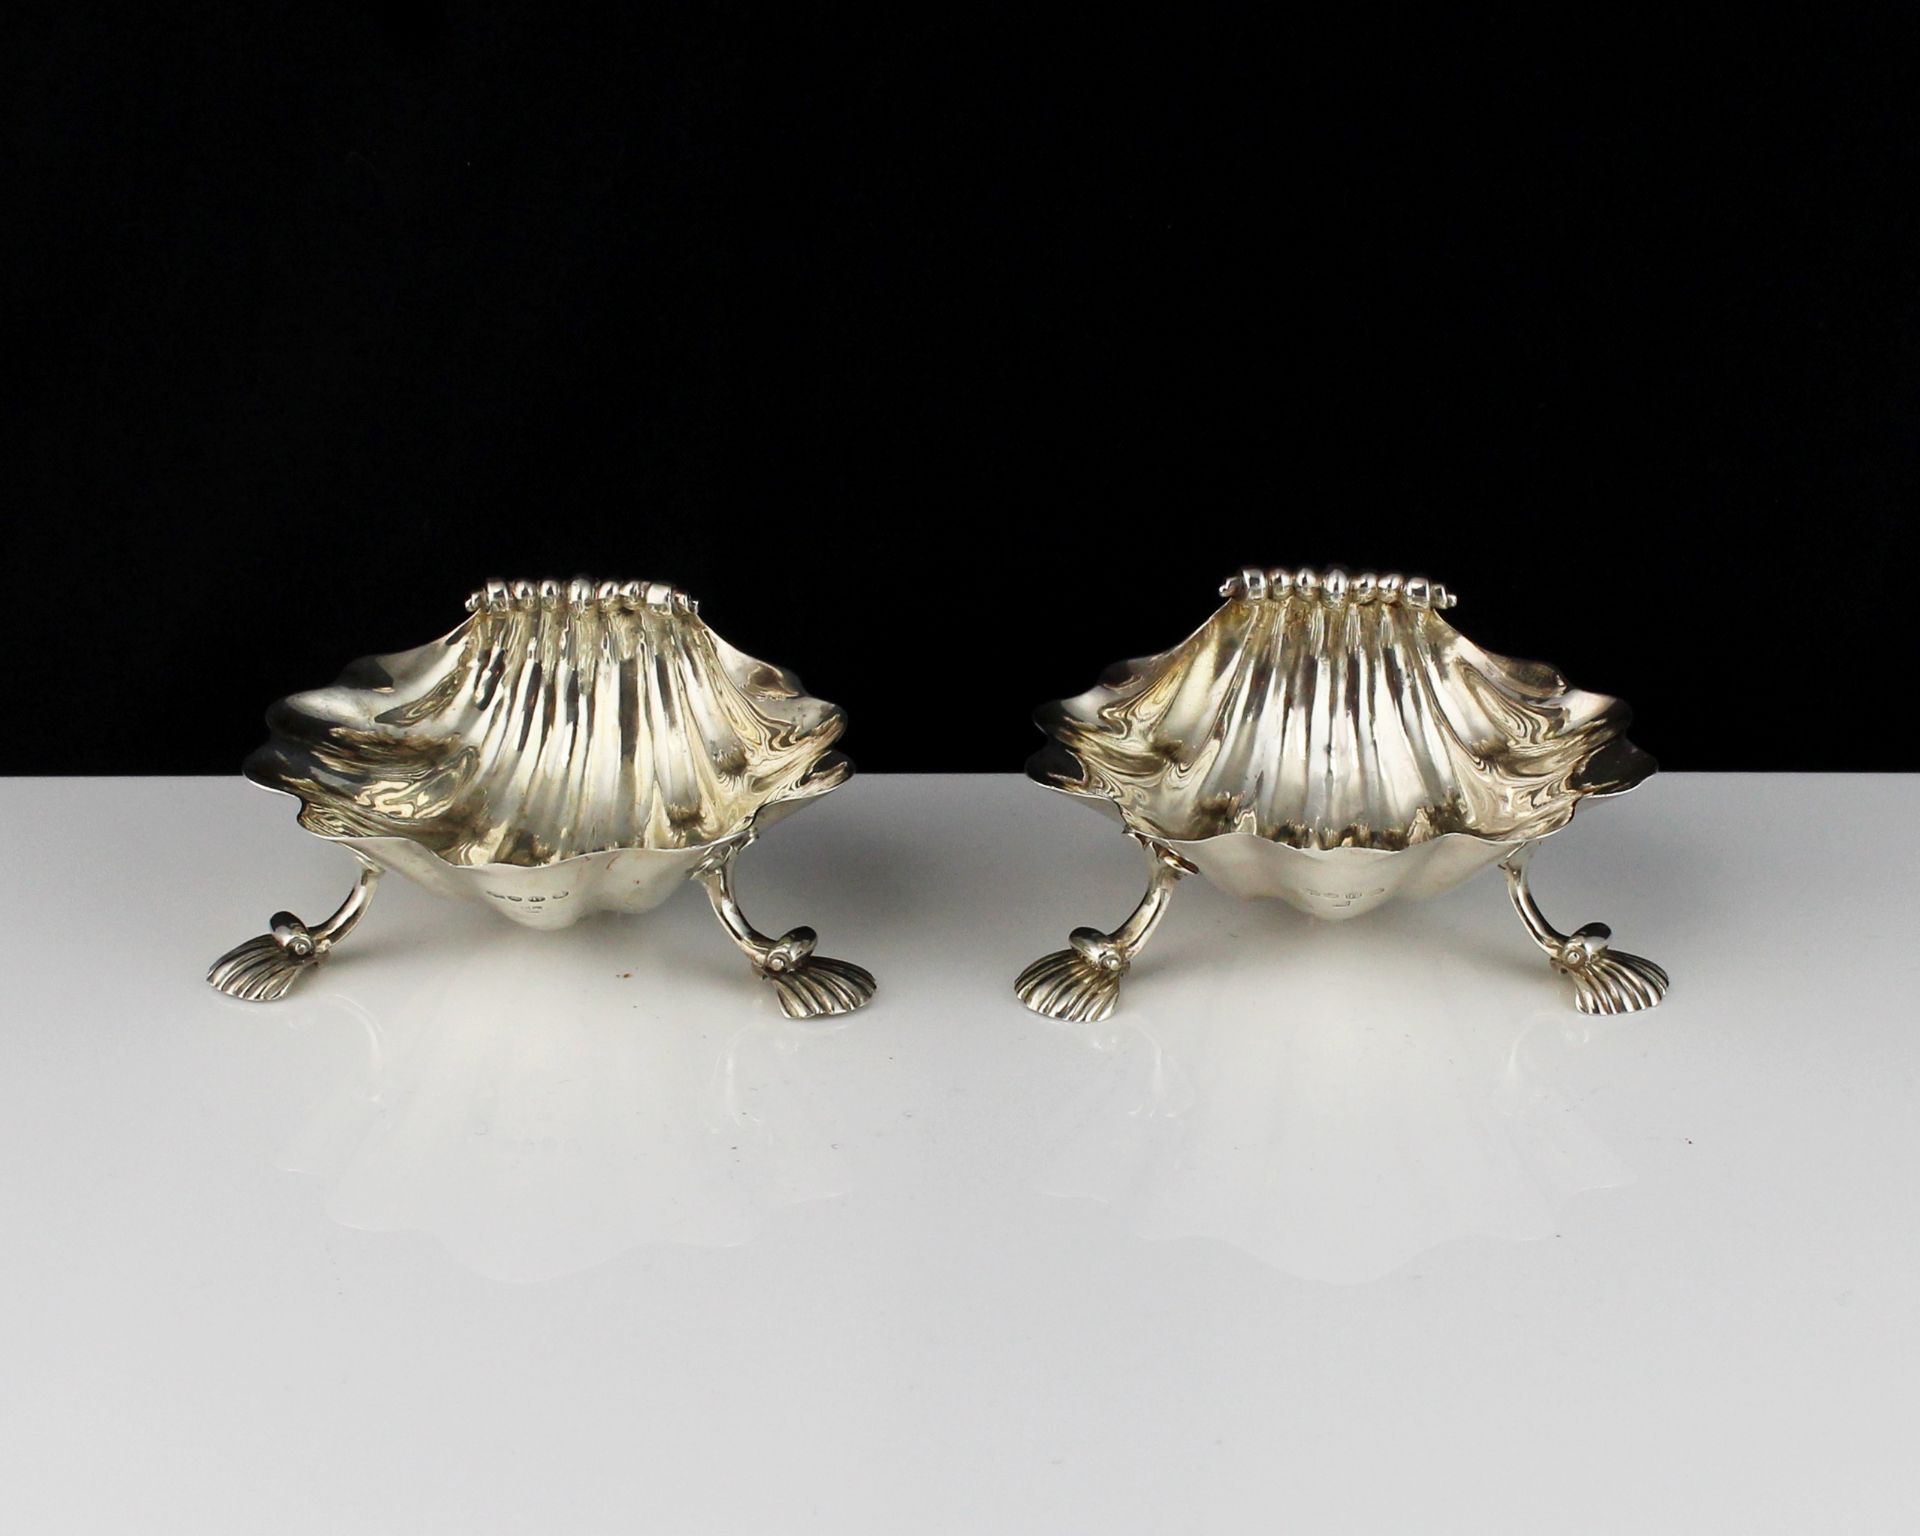 A pair of antique George IV Sterling Silver scallop shell salt cellars maker's mark Charles & John